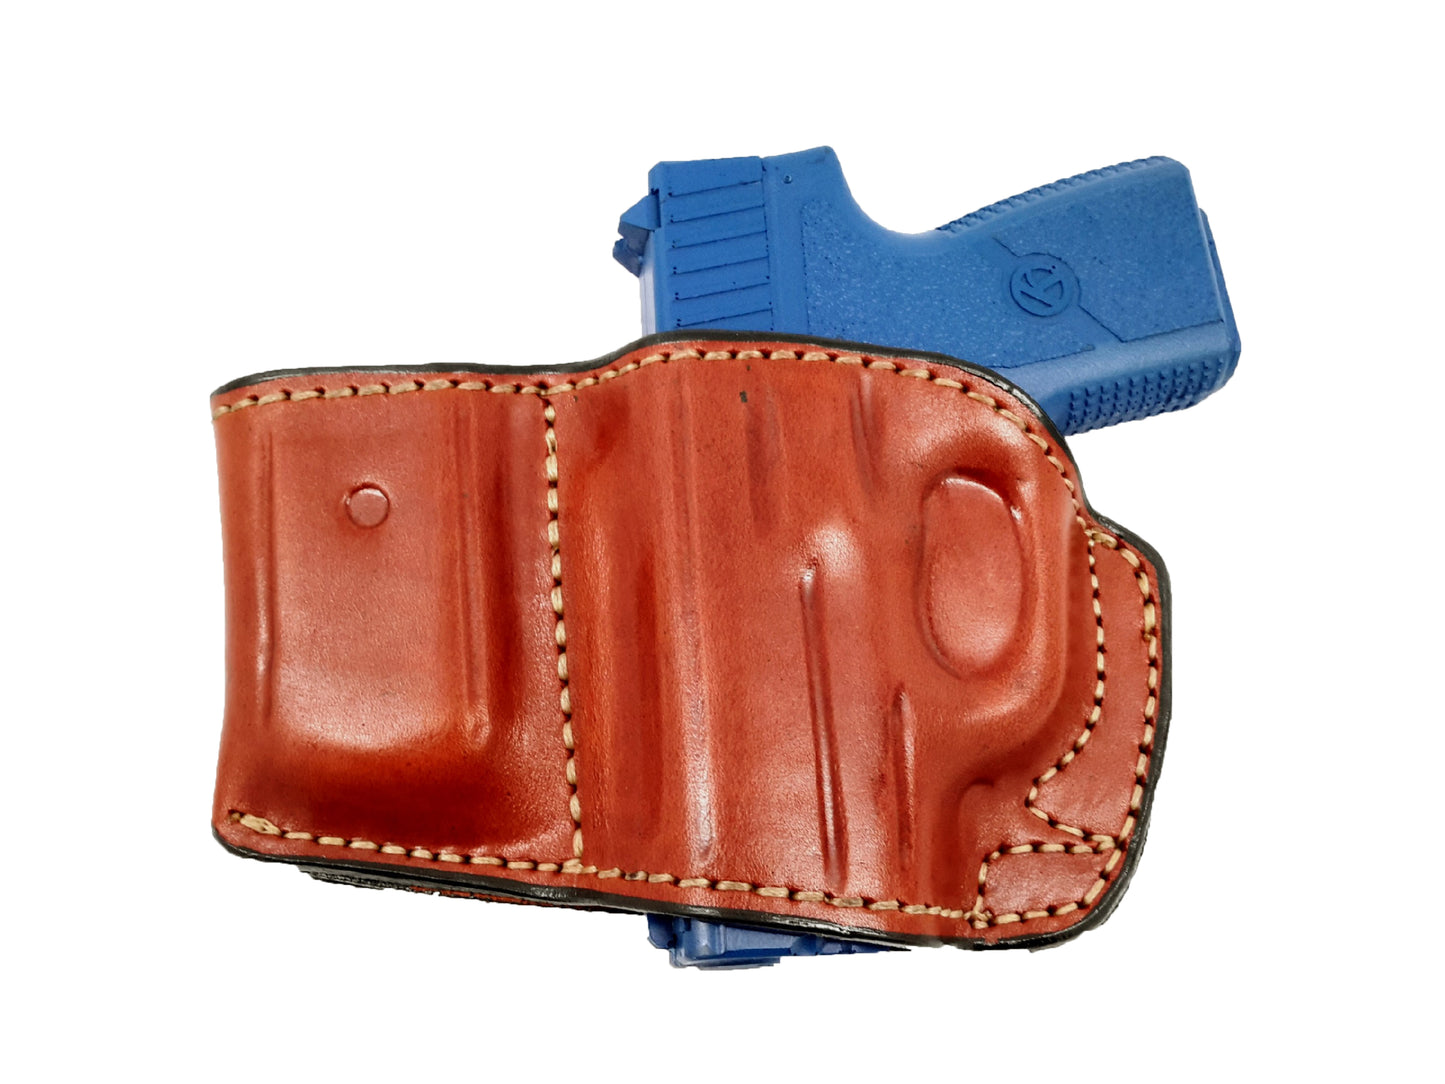 Smith & Wesson CSX Holster and Mag Pouch Combo - OWB Leather Belt Holster